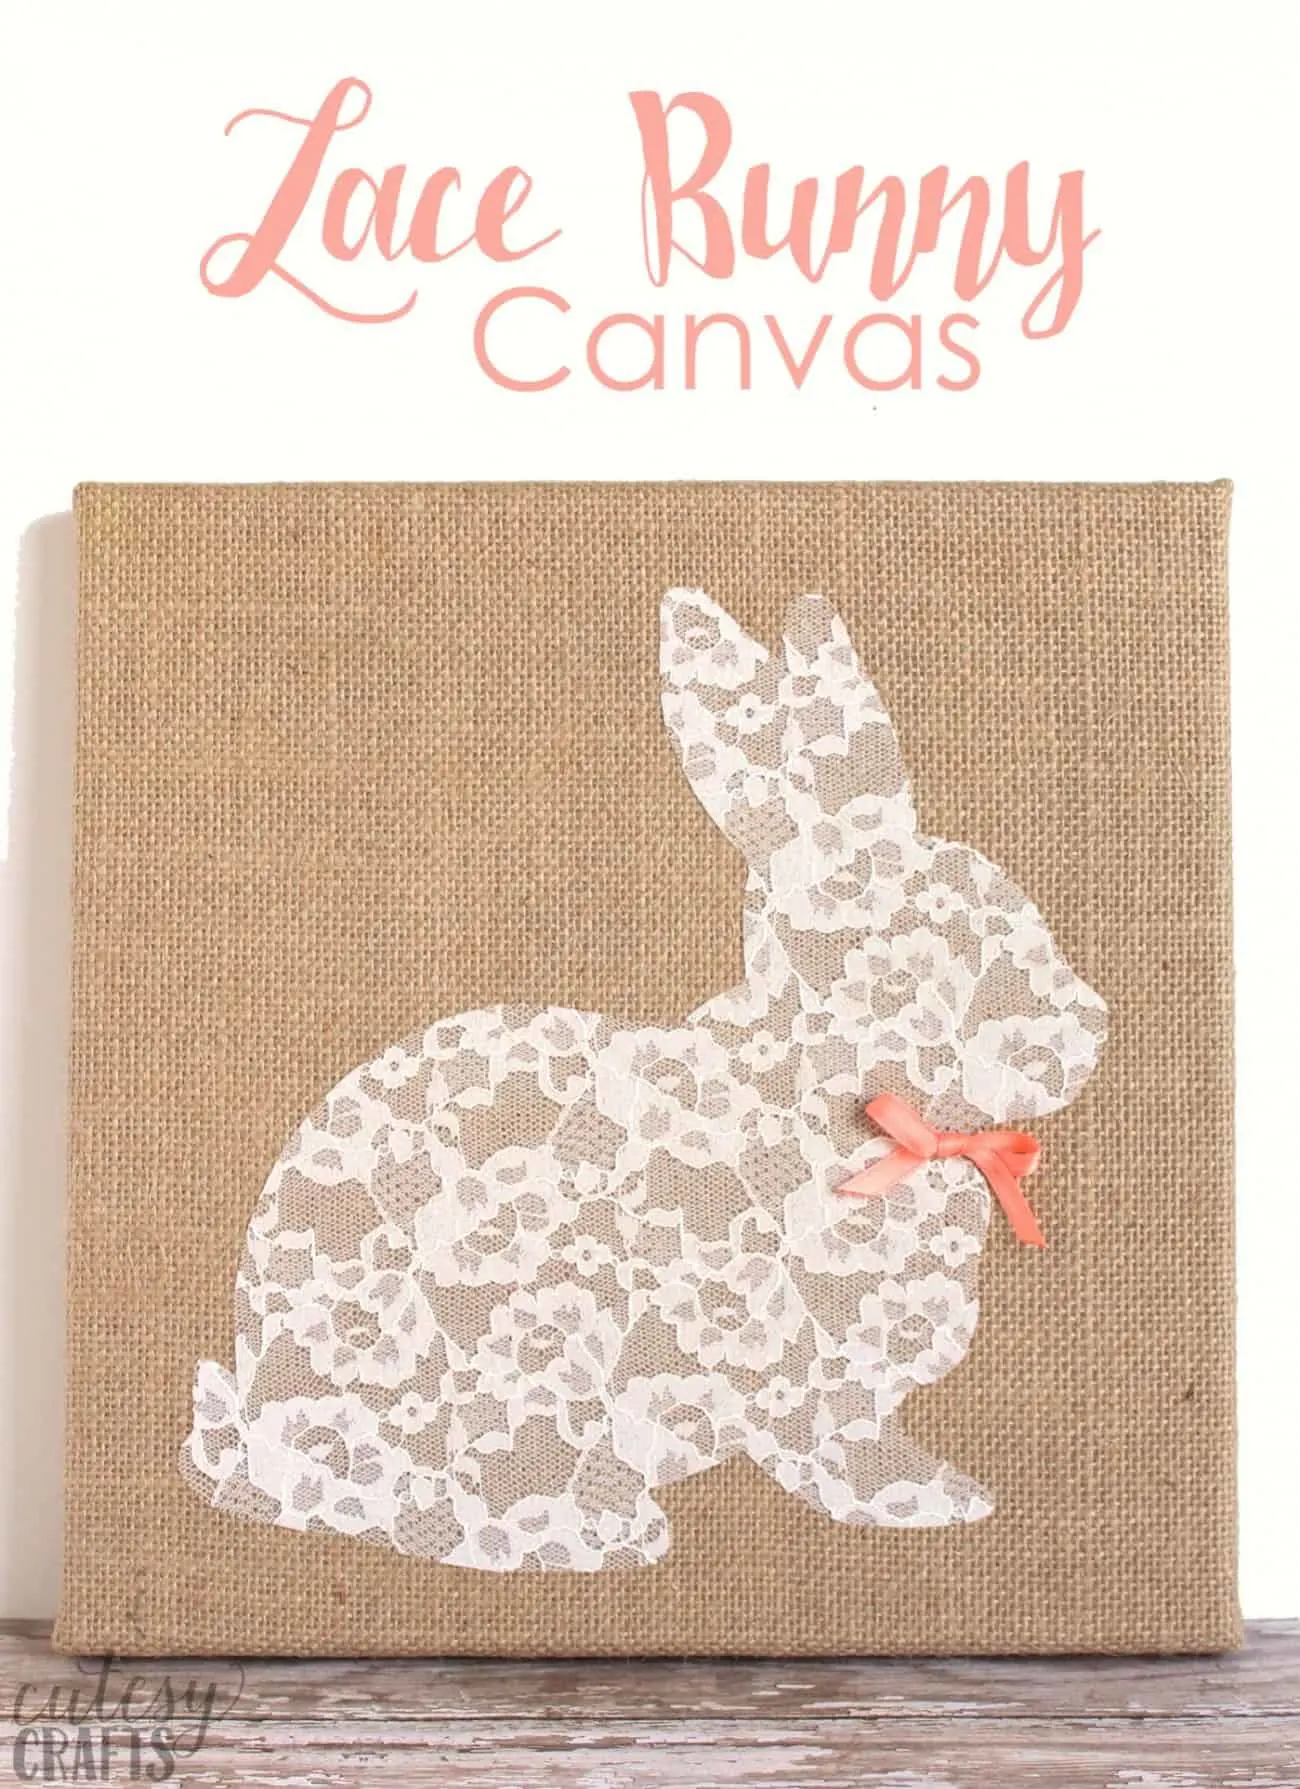 Lace Bunny Canvas Easter Craft